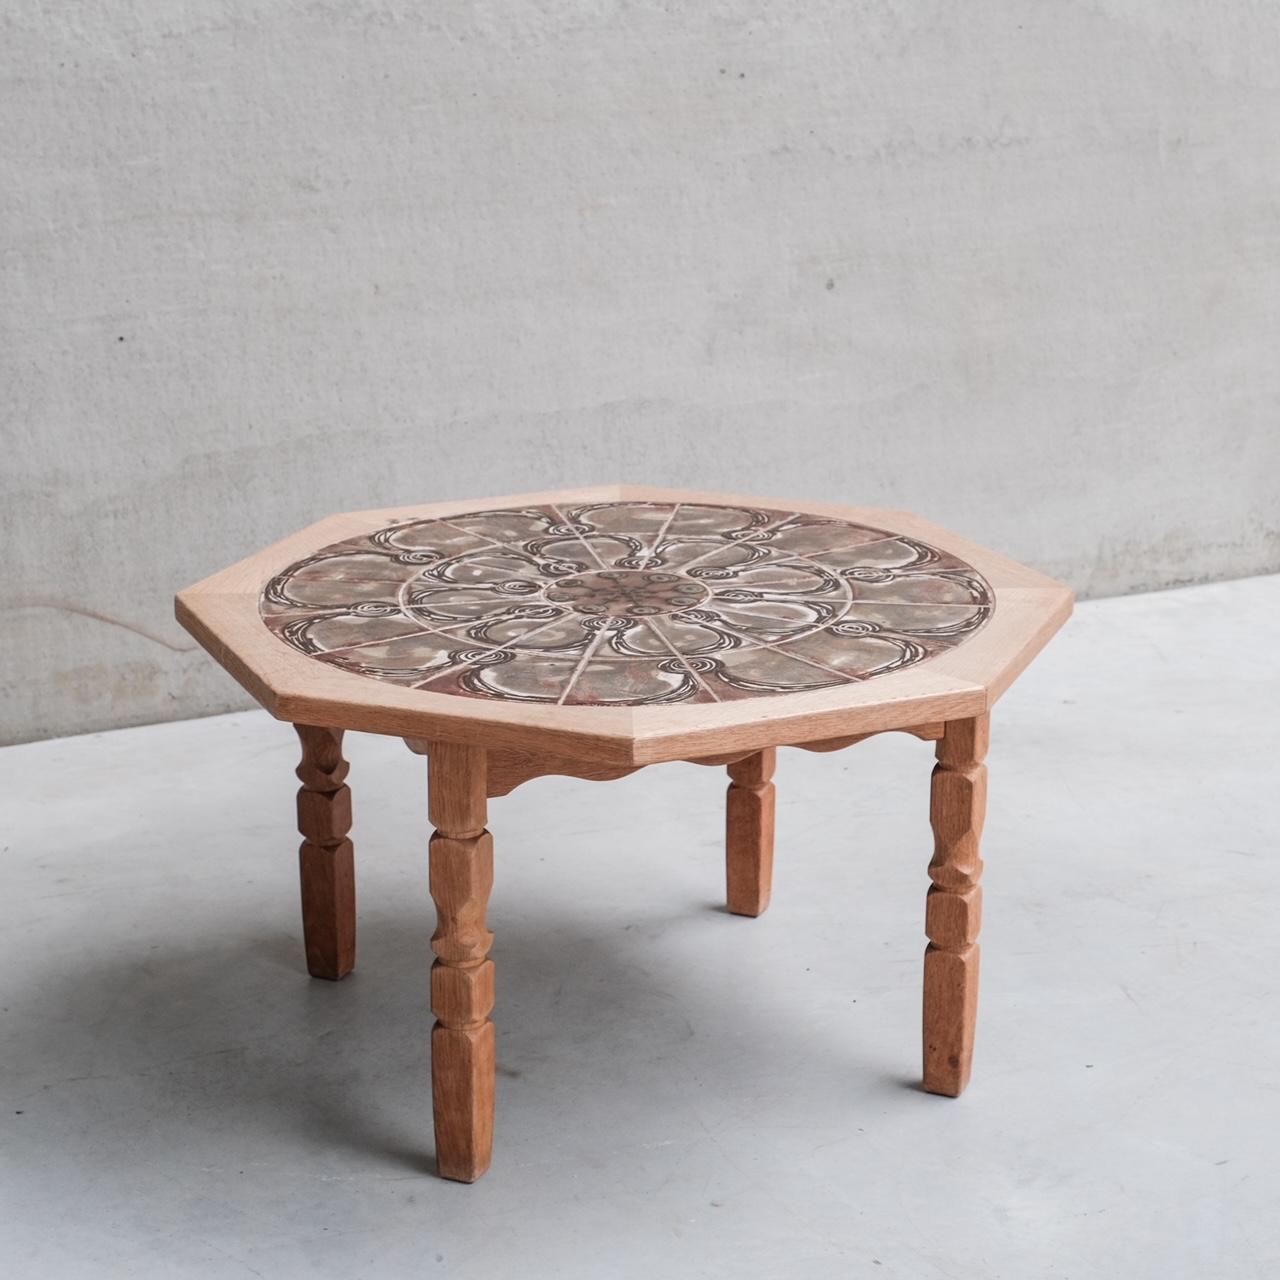 Mid-20th Century Danish Mid-Century Oak and Ceramic Tile Coffee Table For Sale